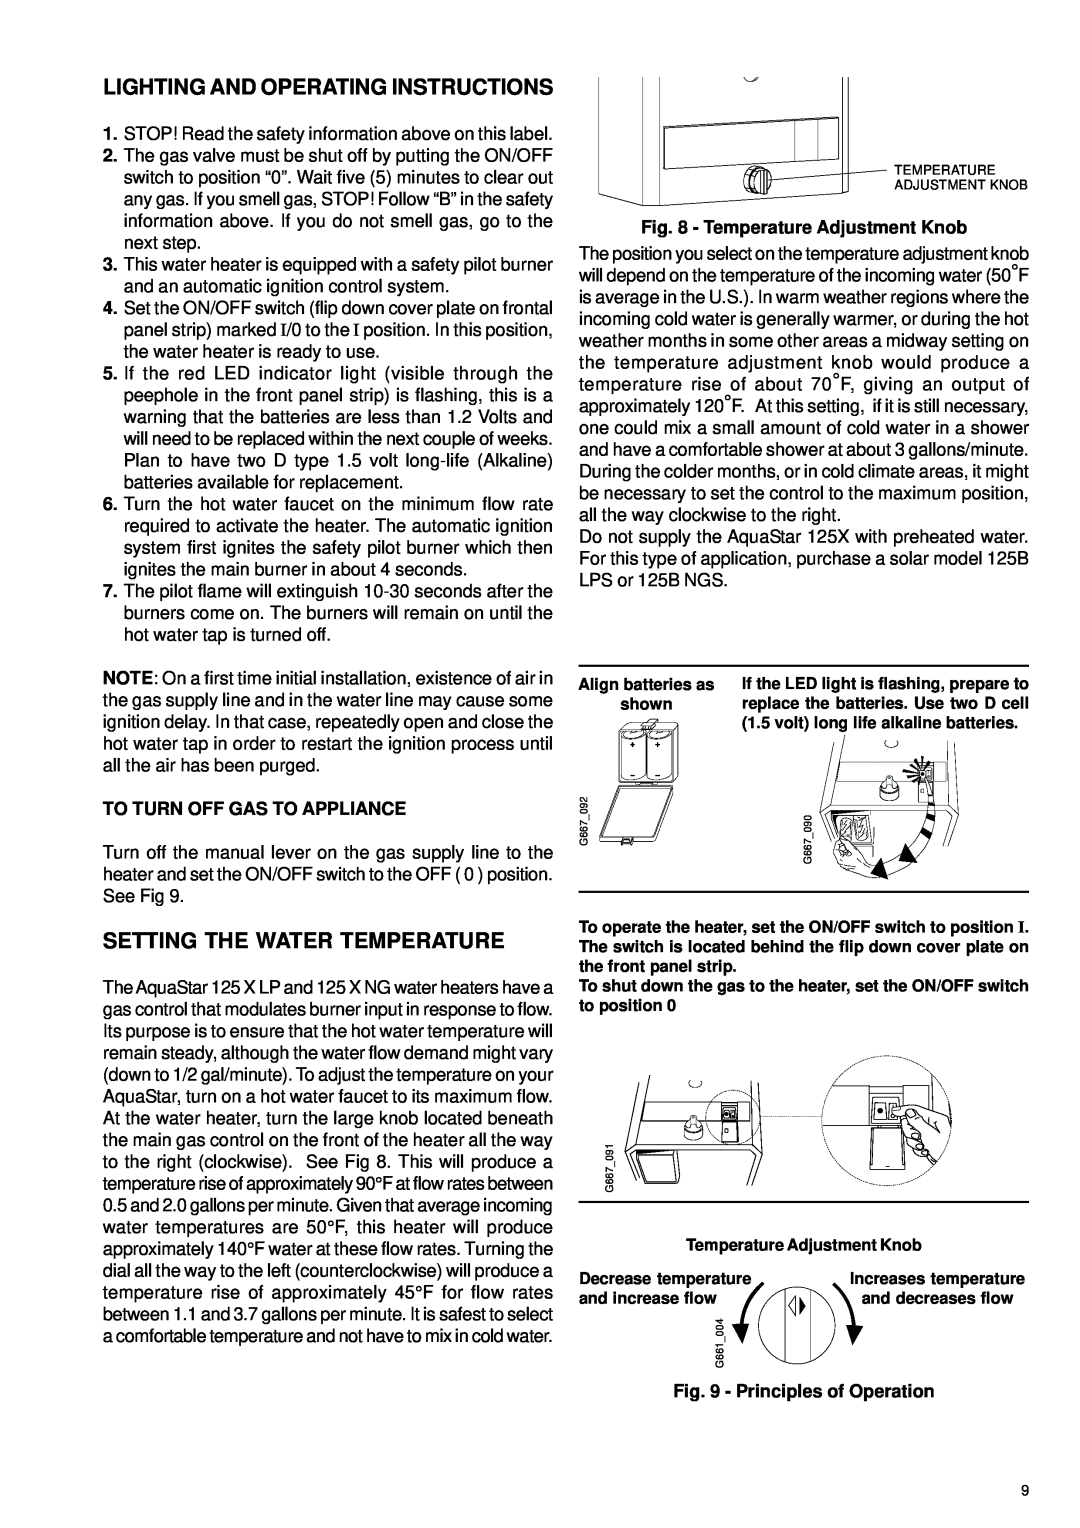 Bosch Appliances 125X LP Lighting And Operating Instructions, Setting The Water Temperature, Temperature Adjustment Knob 